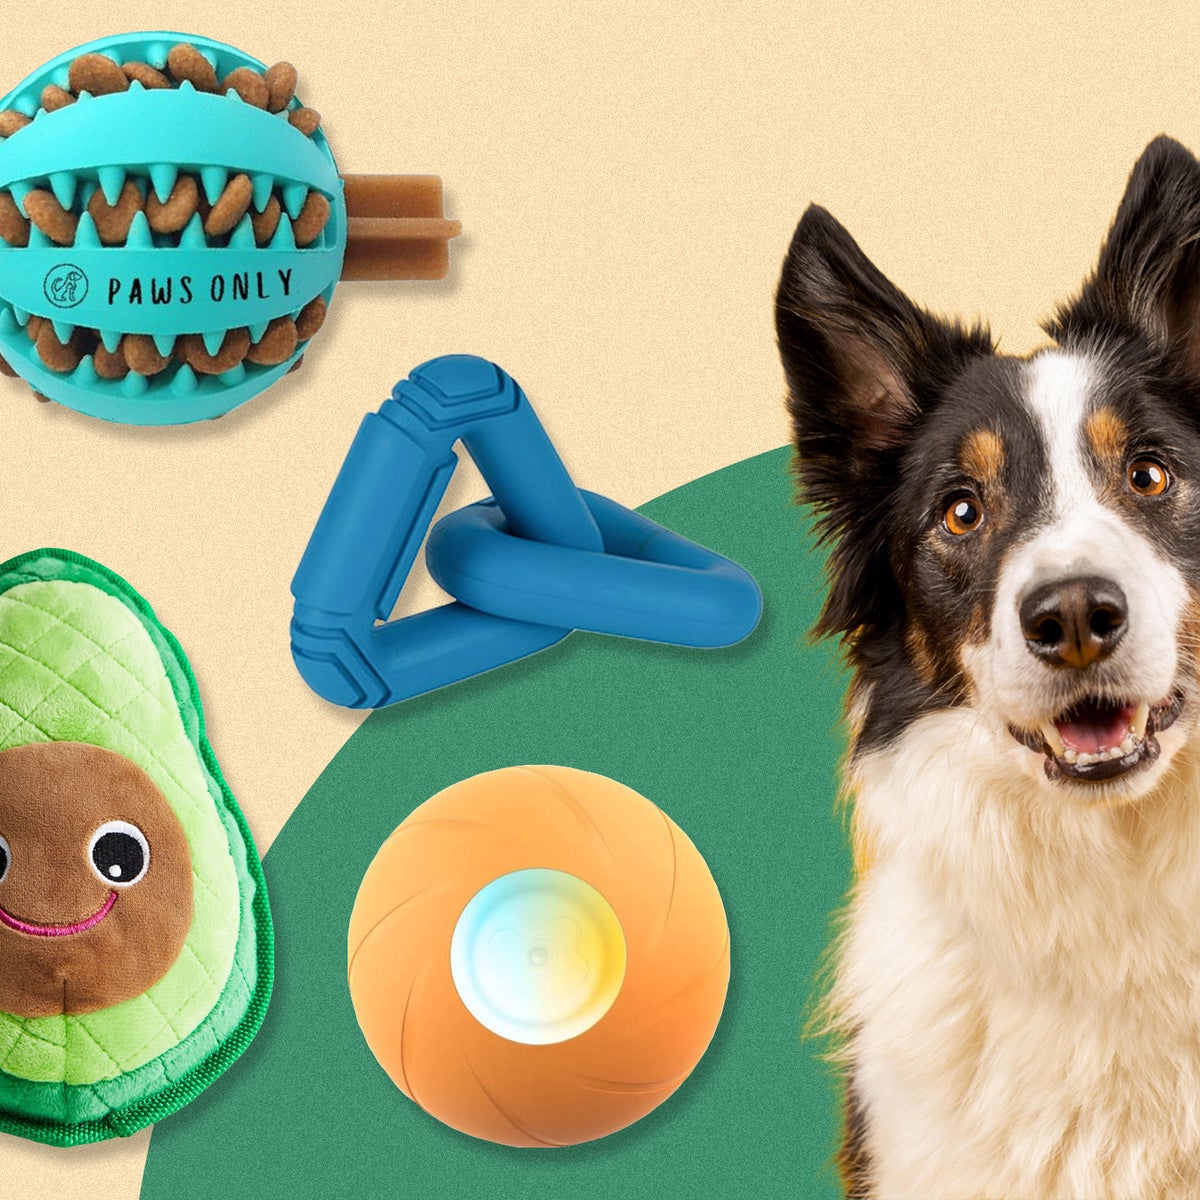 https://static.independent.co.uk/2023/04/13/17/best%20dog%20toys%20copy.jpg?width=1200&height=1200&fit=crop